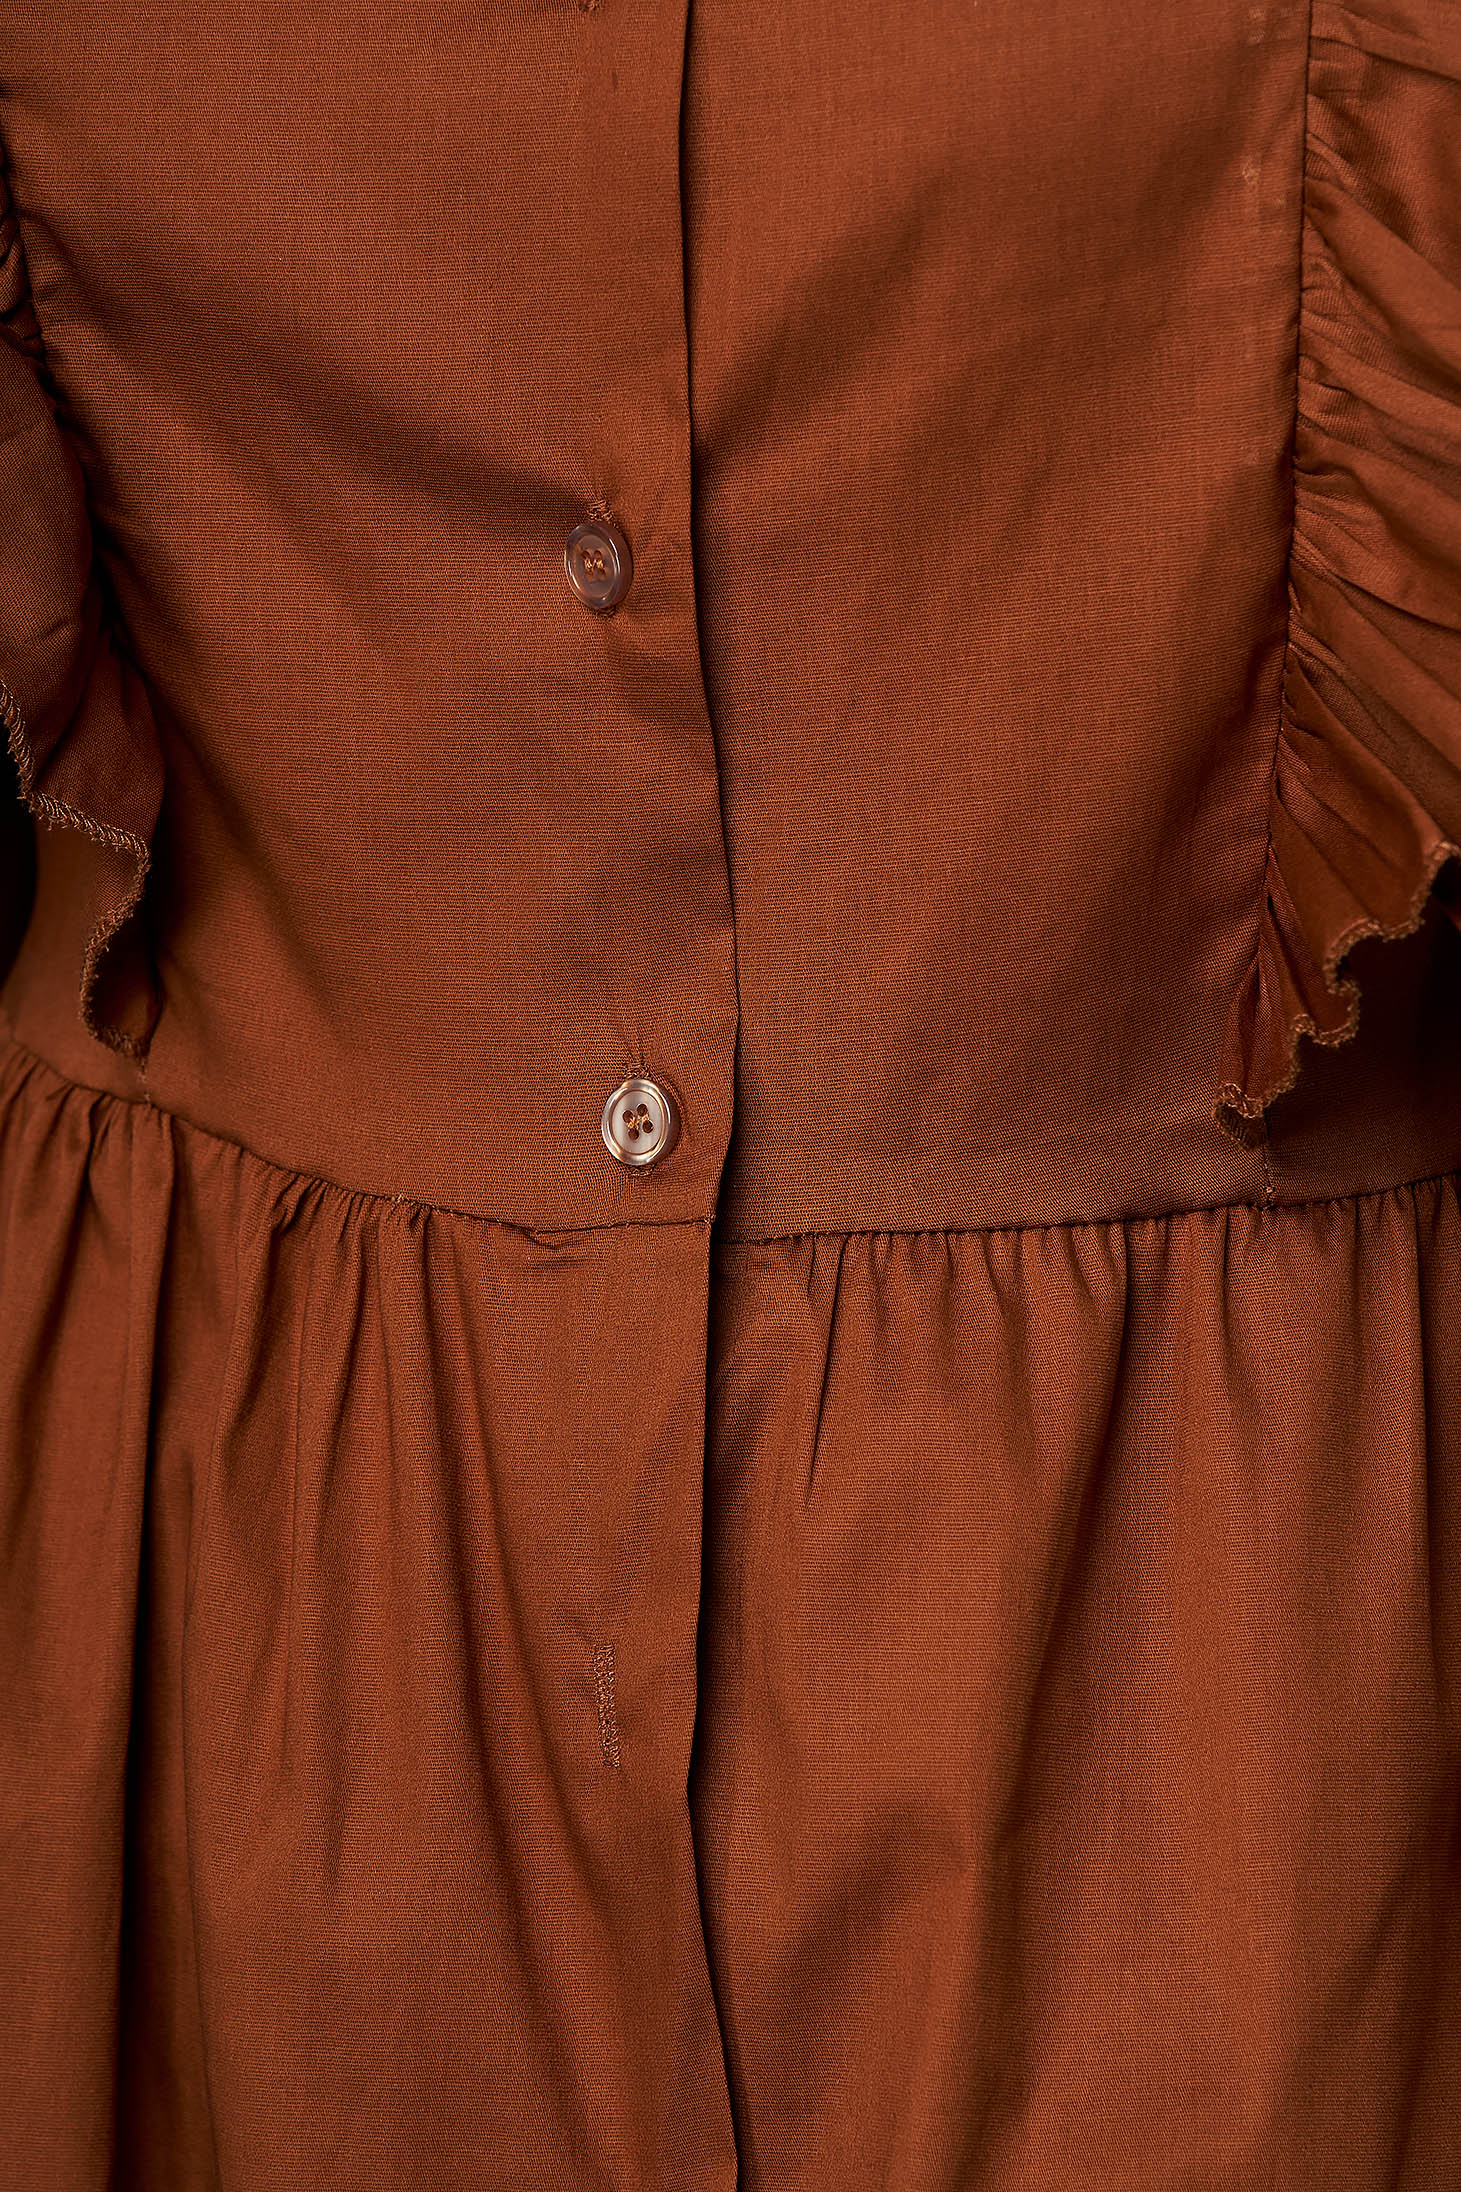 Brown dress daily flared 3/4 sleeve with ruffle details nonelastic cotton 4 - StarShinerS.com